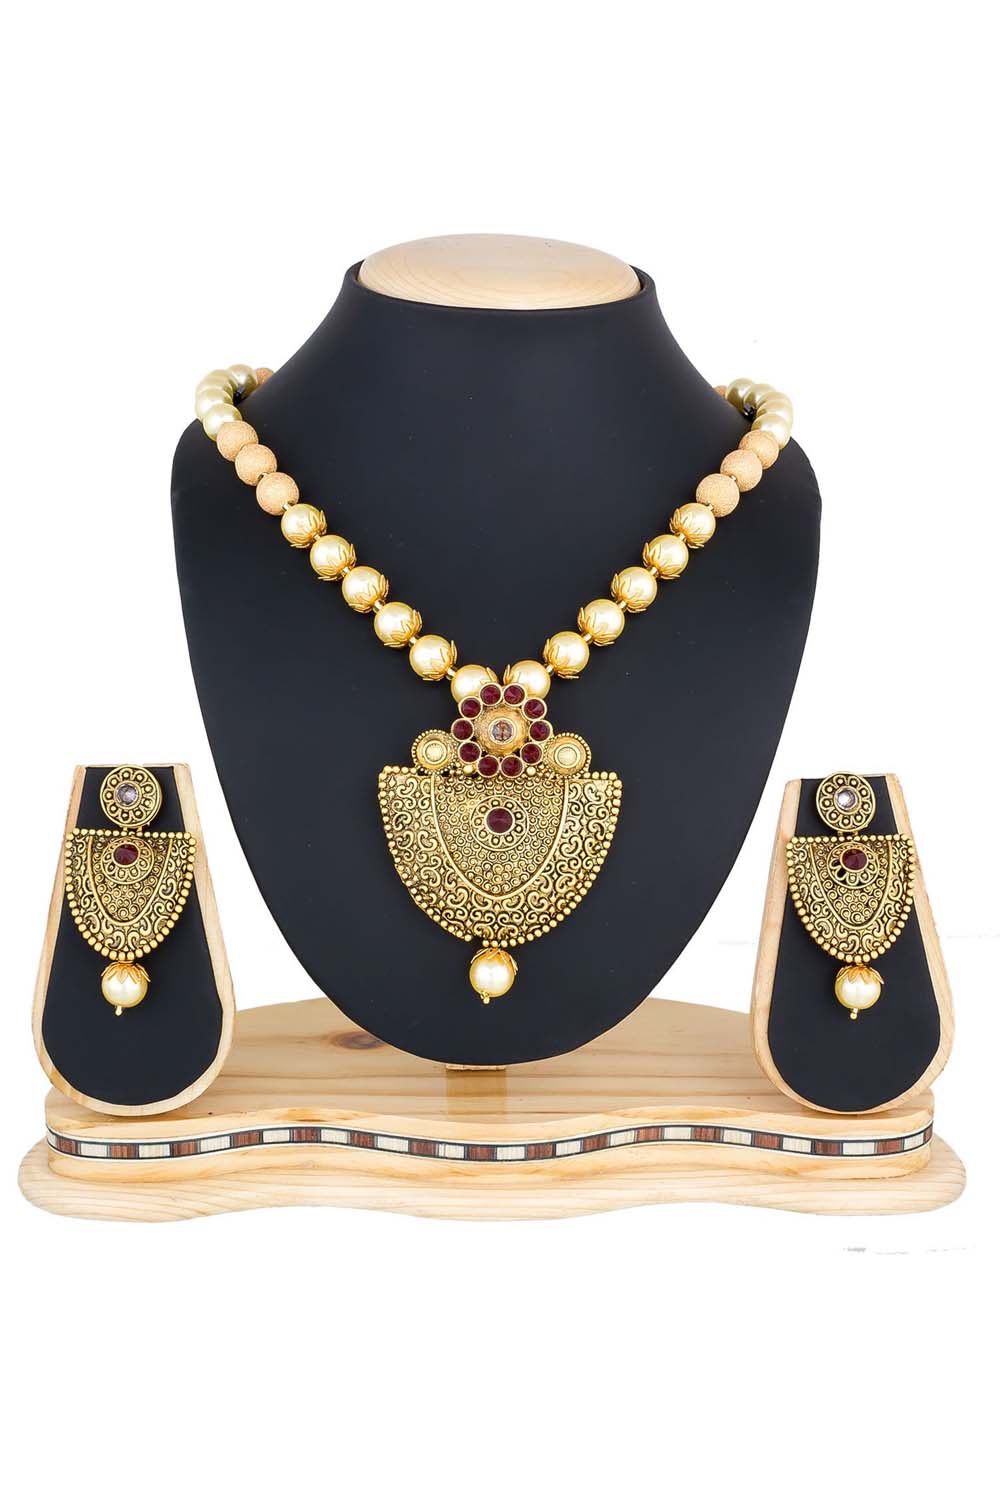 Women's Alloy Necklace Set in Marron and Golden